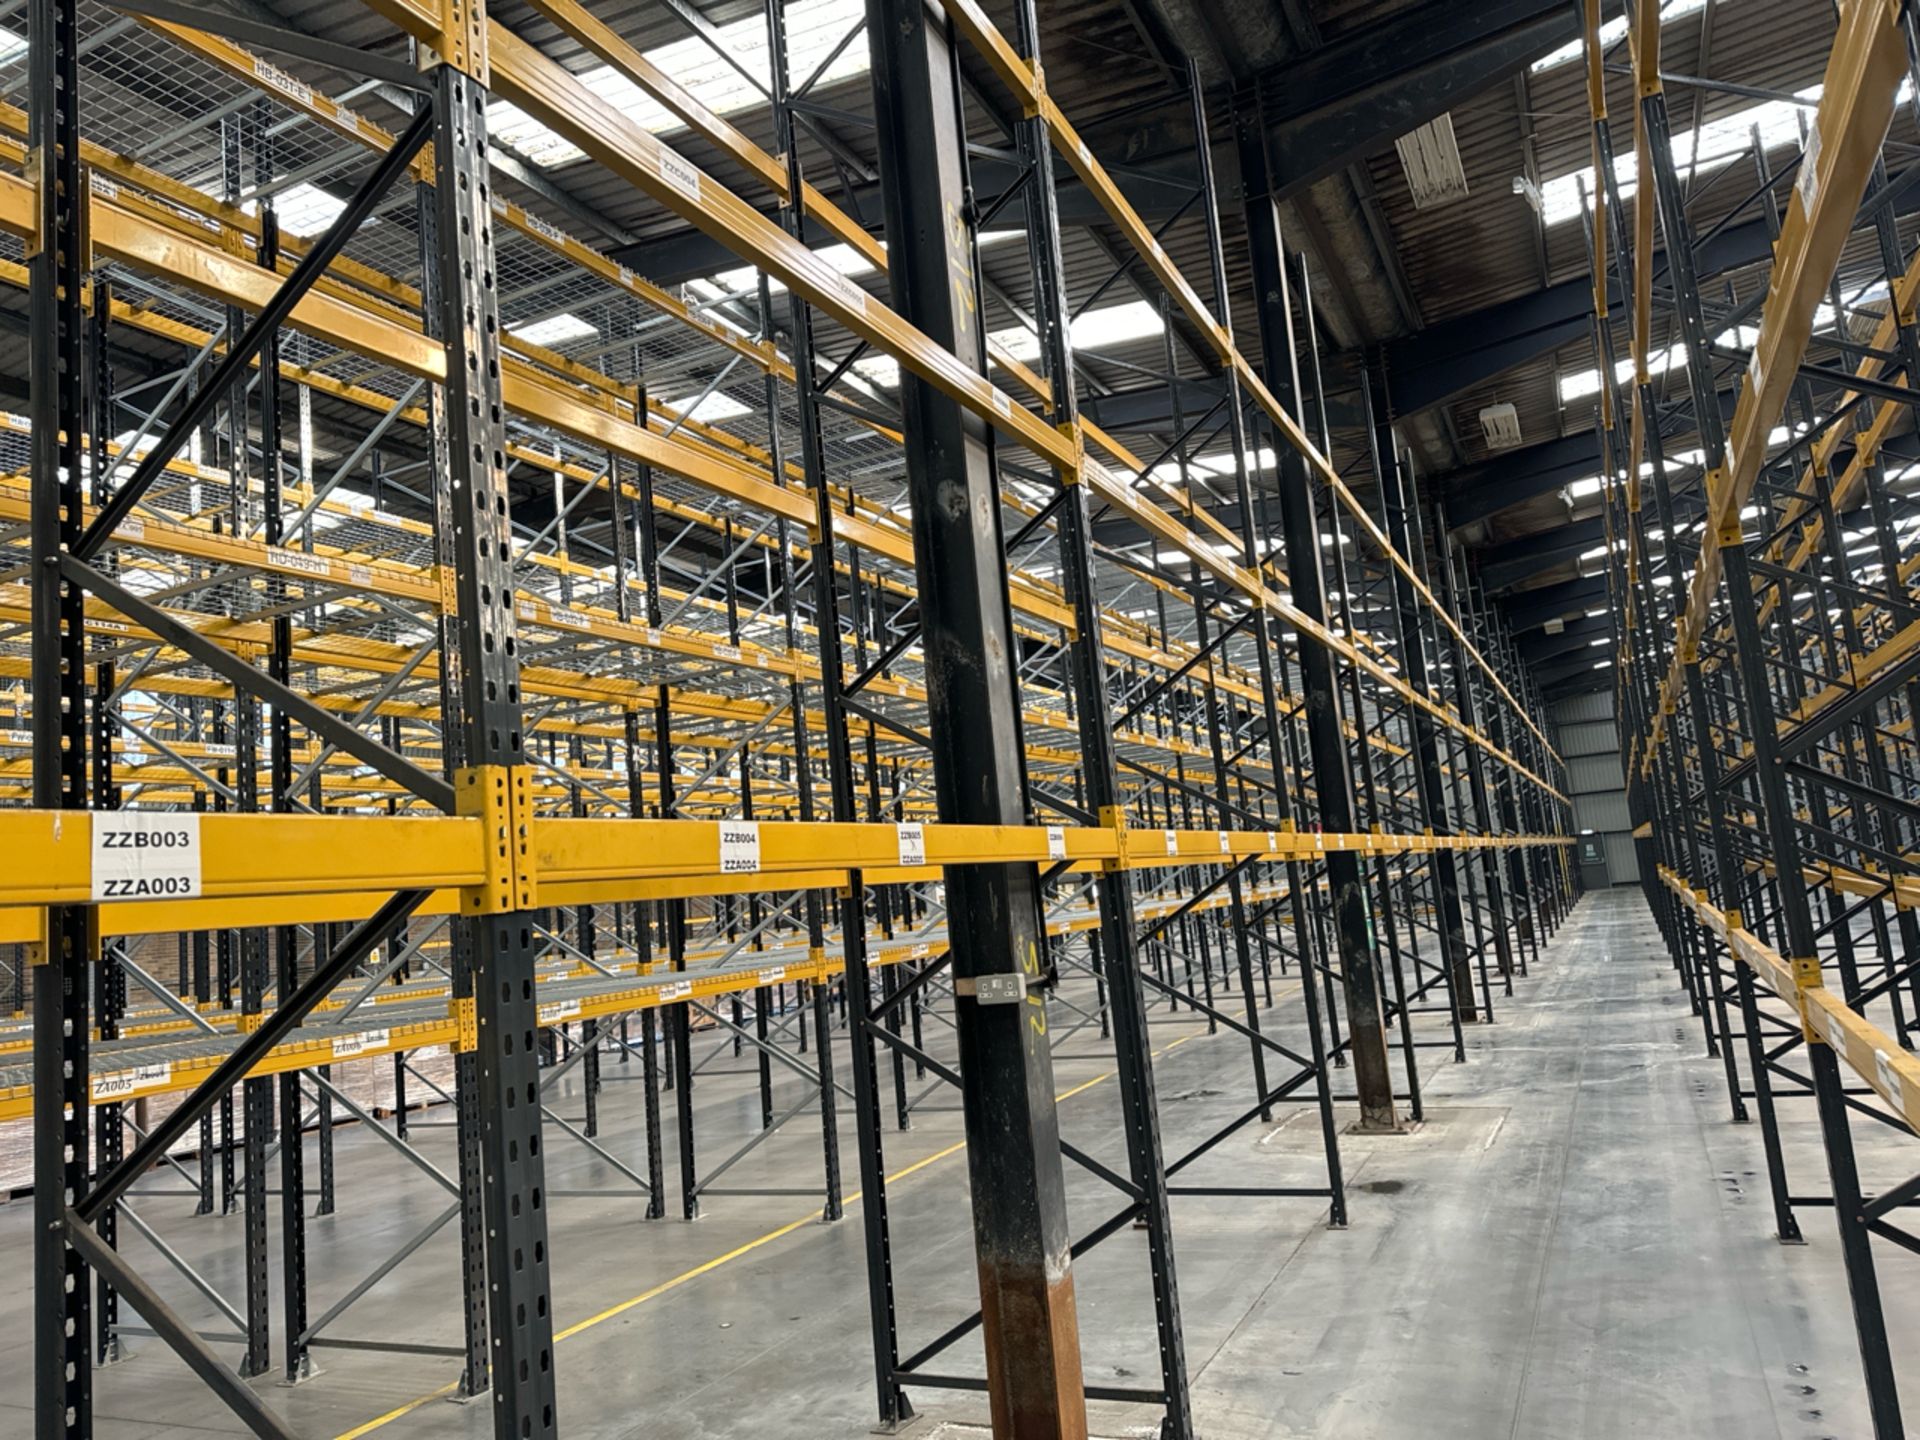 20 Bays Of Boltless Industrial Pallet Racking - Image 3 of 9